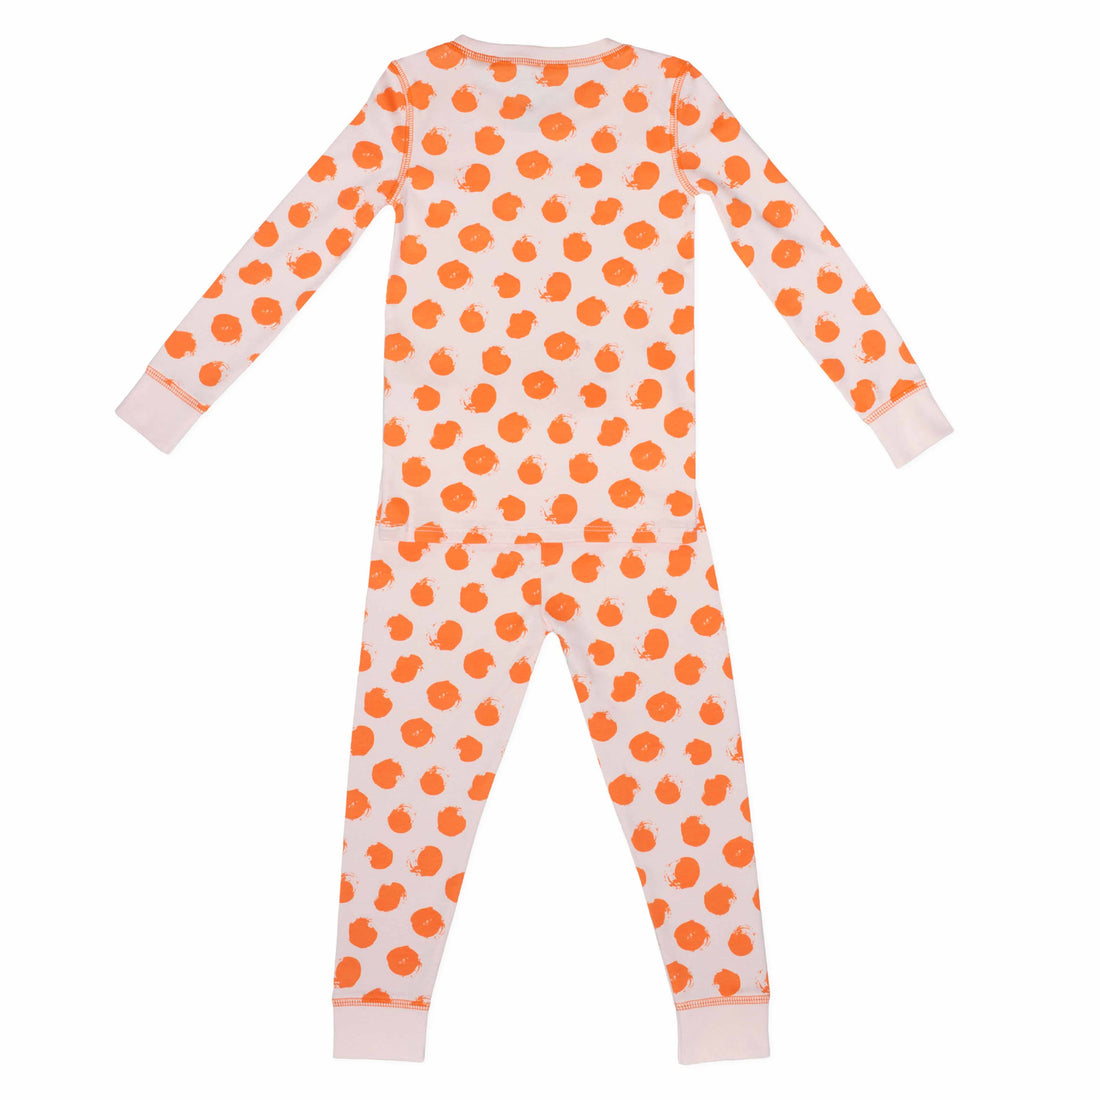 Pink two-piece pajama set with orange polka dot pattern made with pima cotton - back view